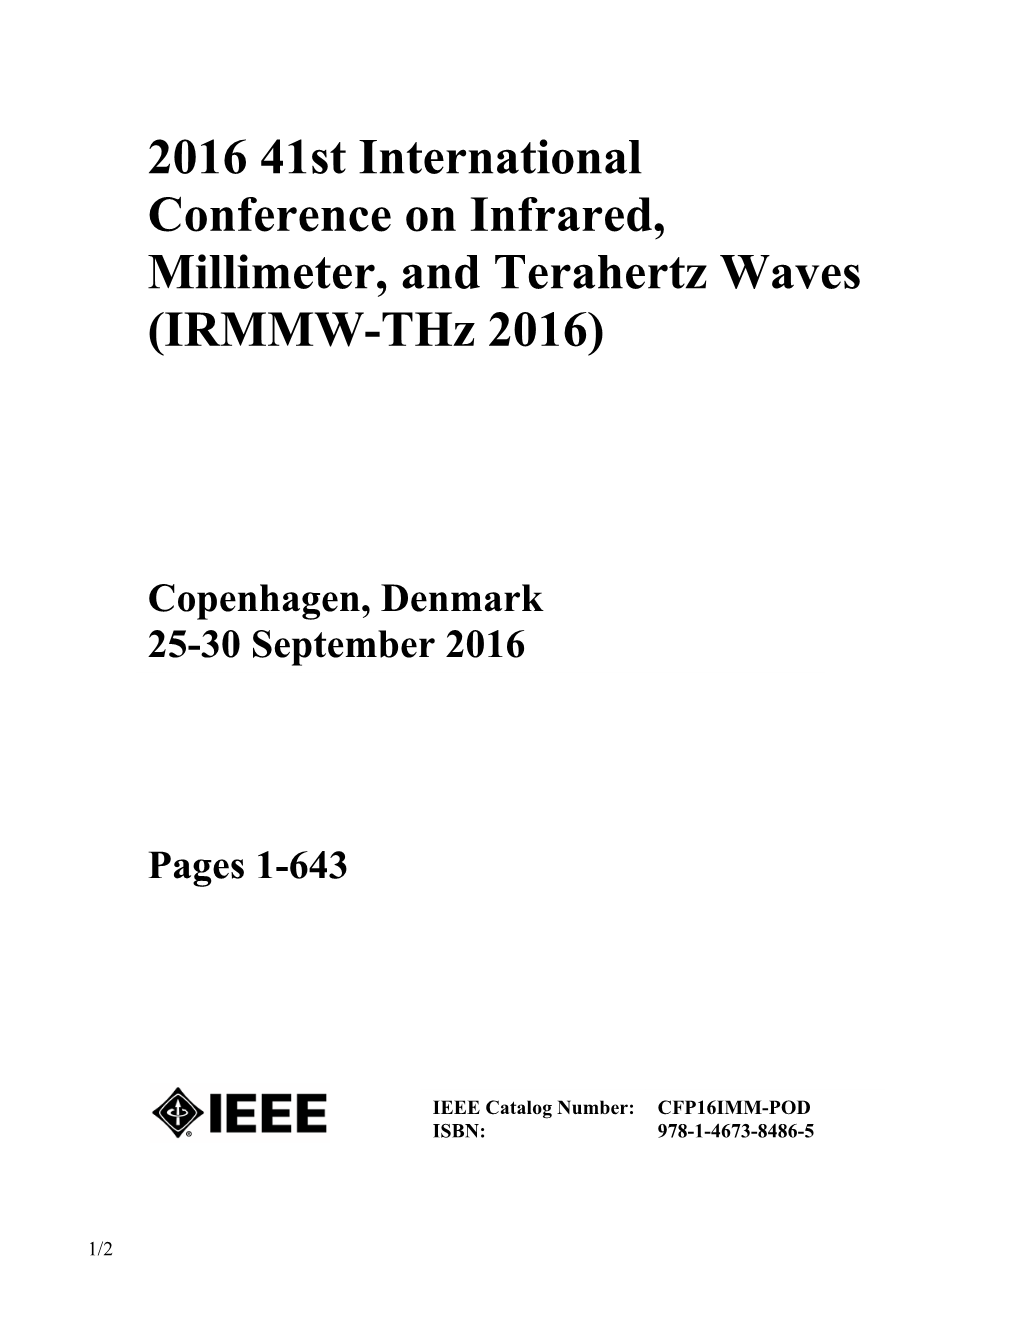 2016 41St International Conference on Infrared, Millimeter, and Terahertz Waves (IRMMW-Thz 2016)